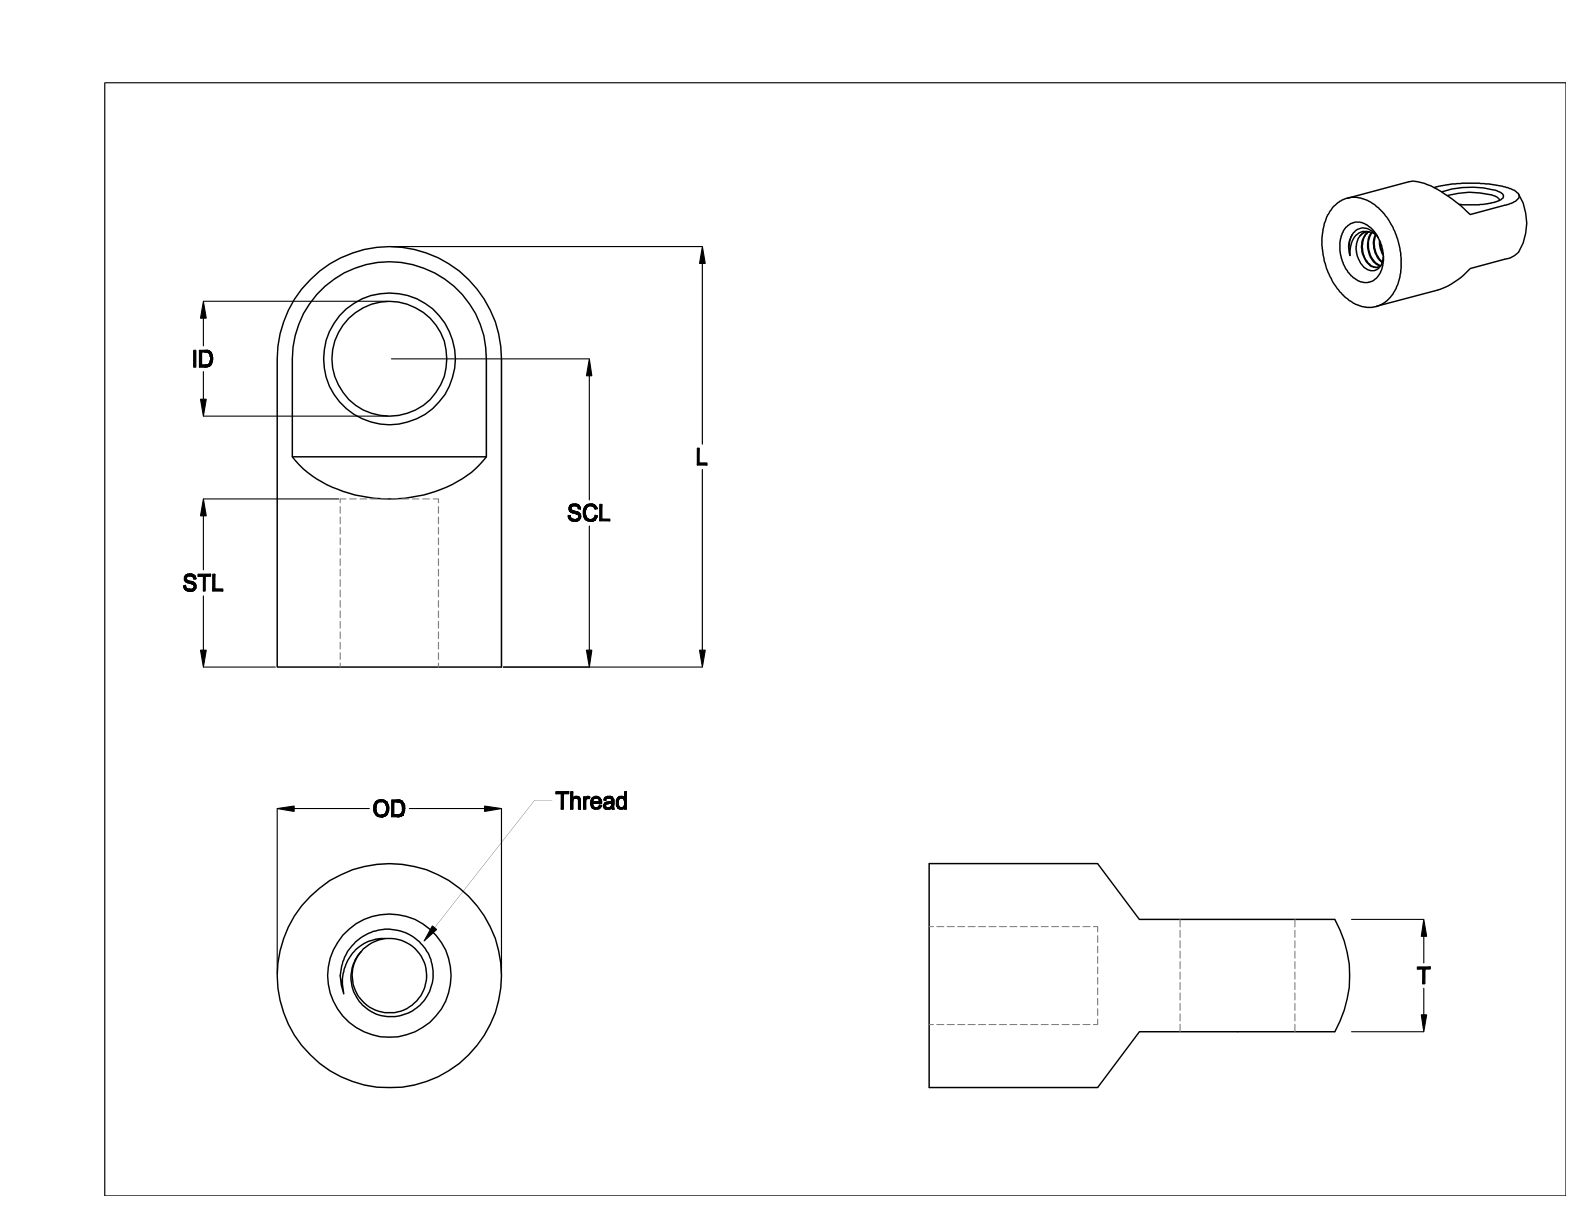 FGCBNBE Rod End Nuts cad drawing